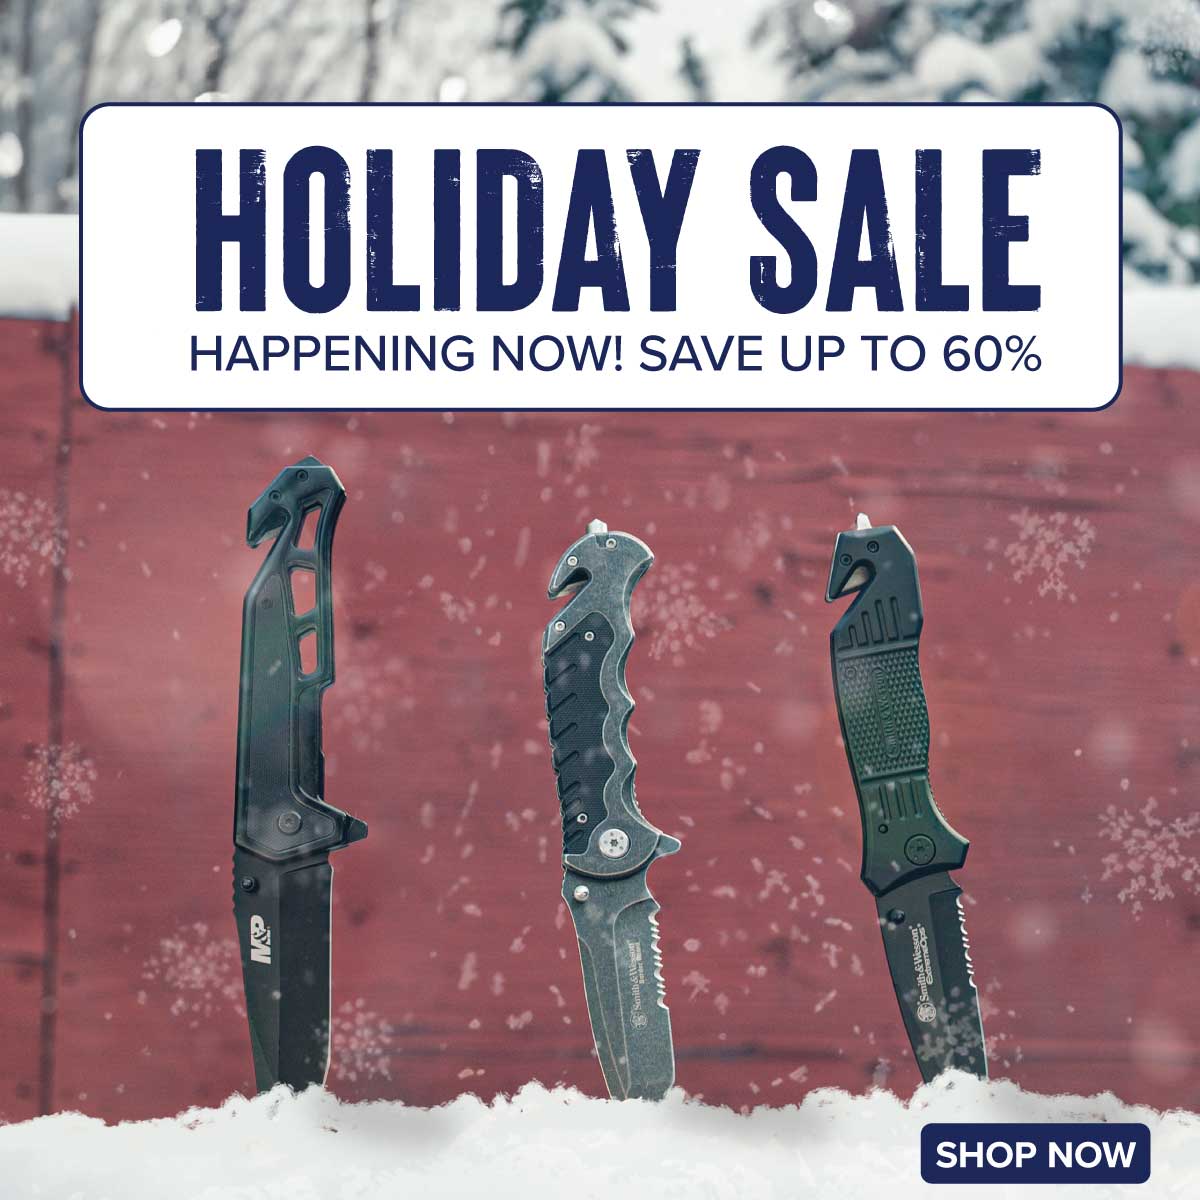 holiday sale happening now! save up to 60%, shop now